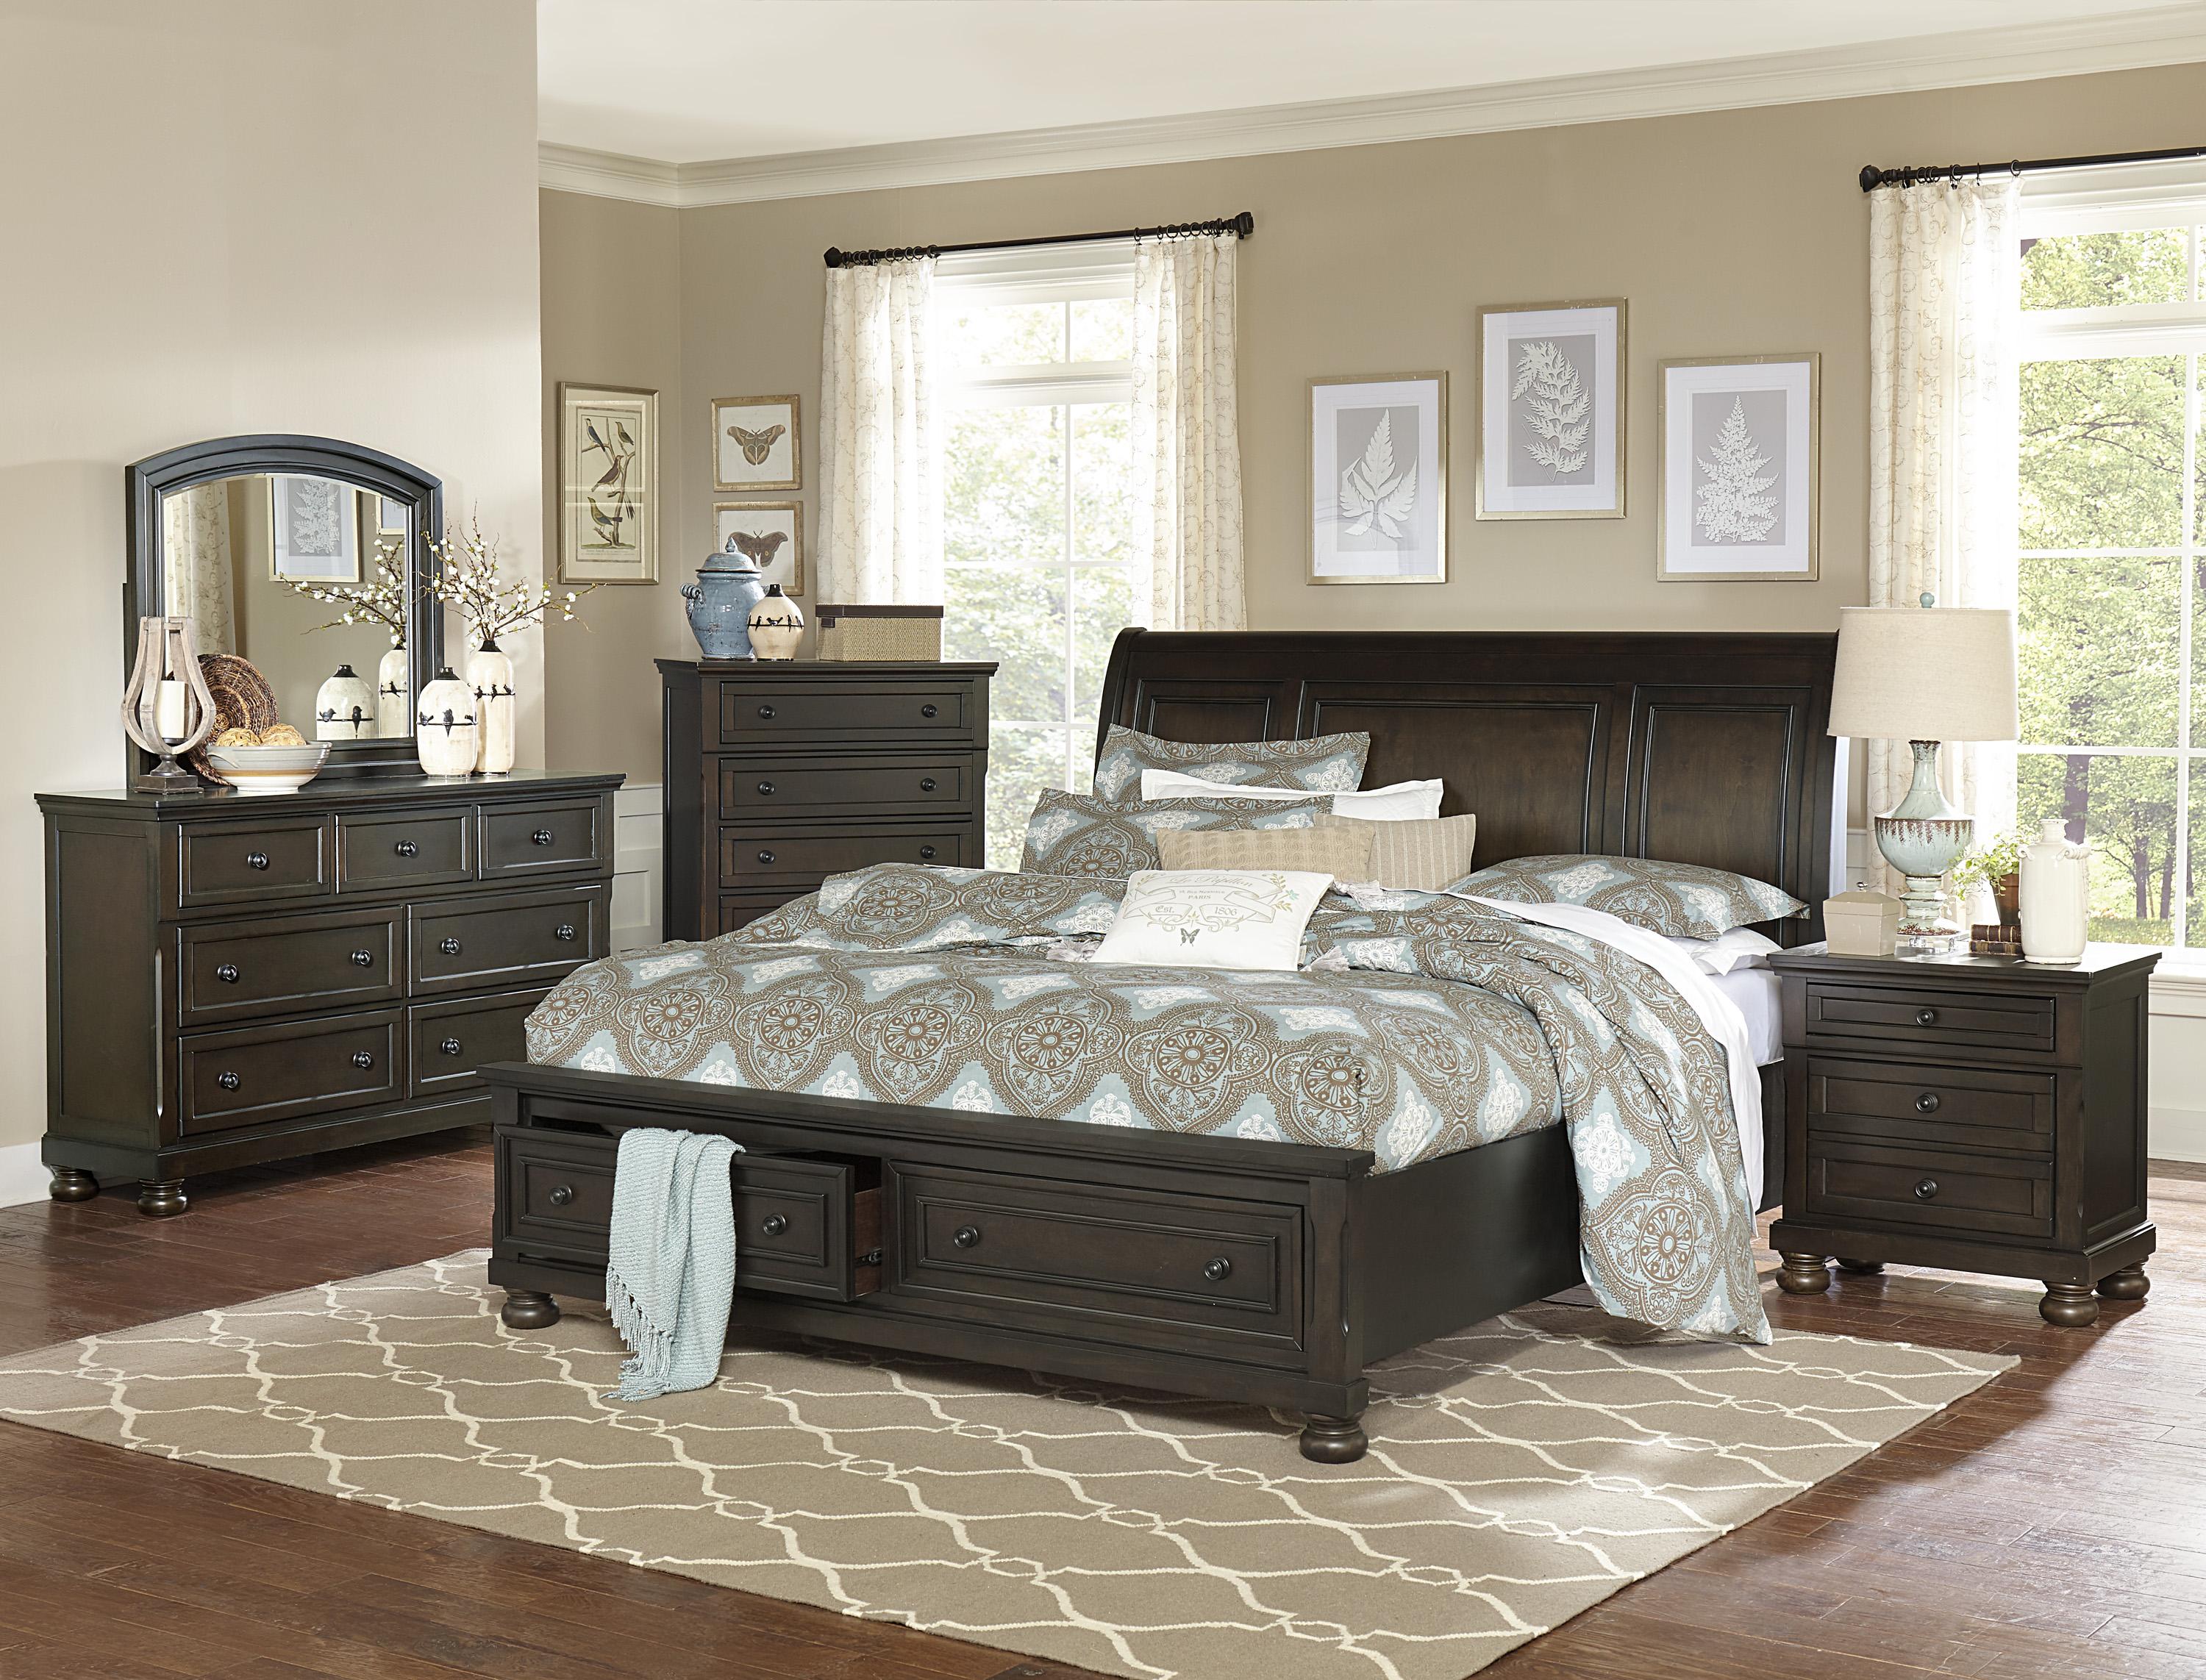 Transitional Bedroom Set 1718KGY-1CK-6PC Begonia 1718KGY-1CK-6PC in Grayish Brown 